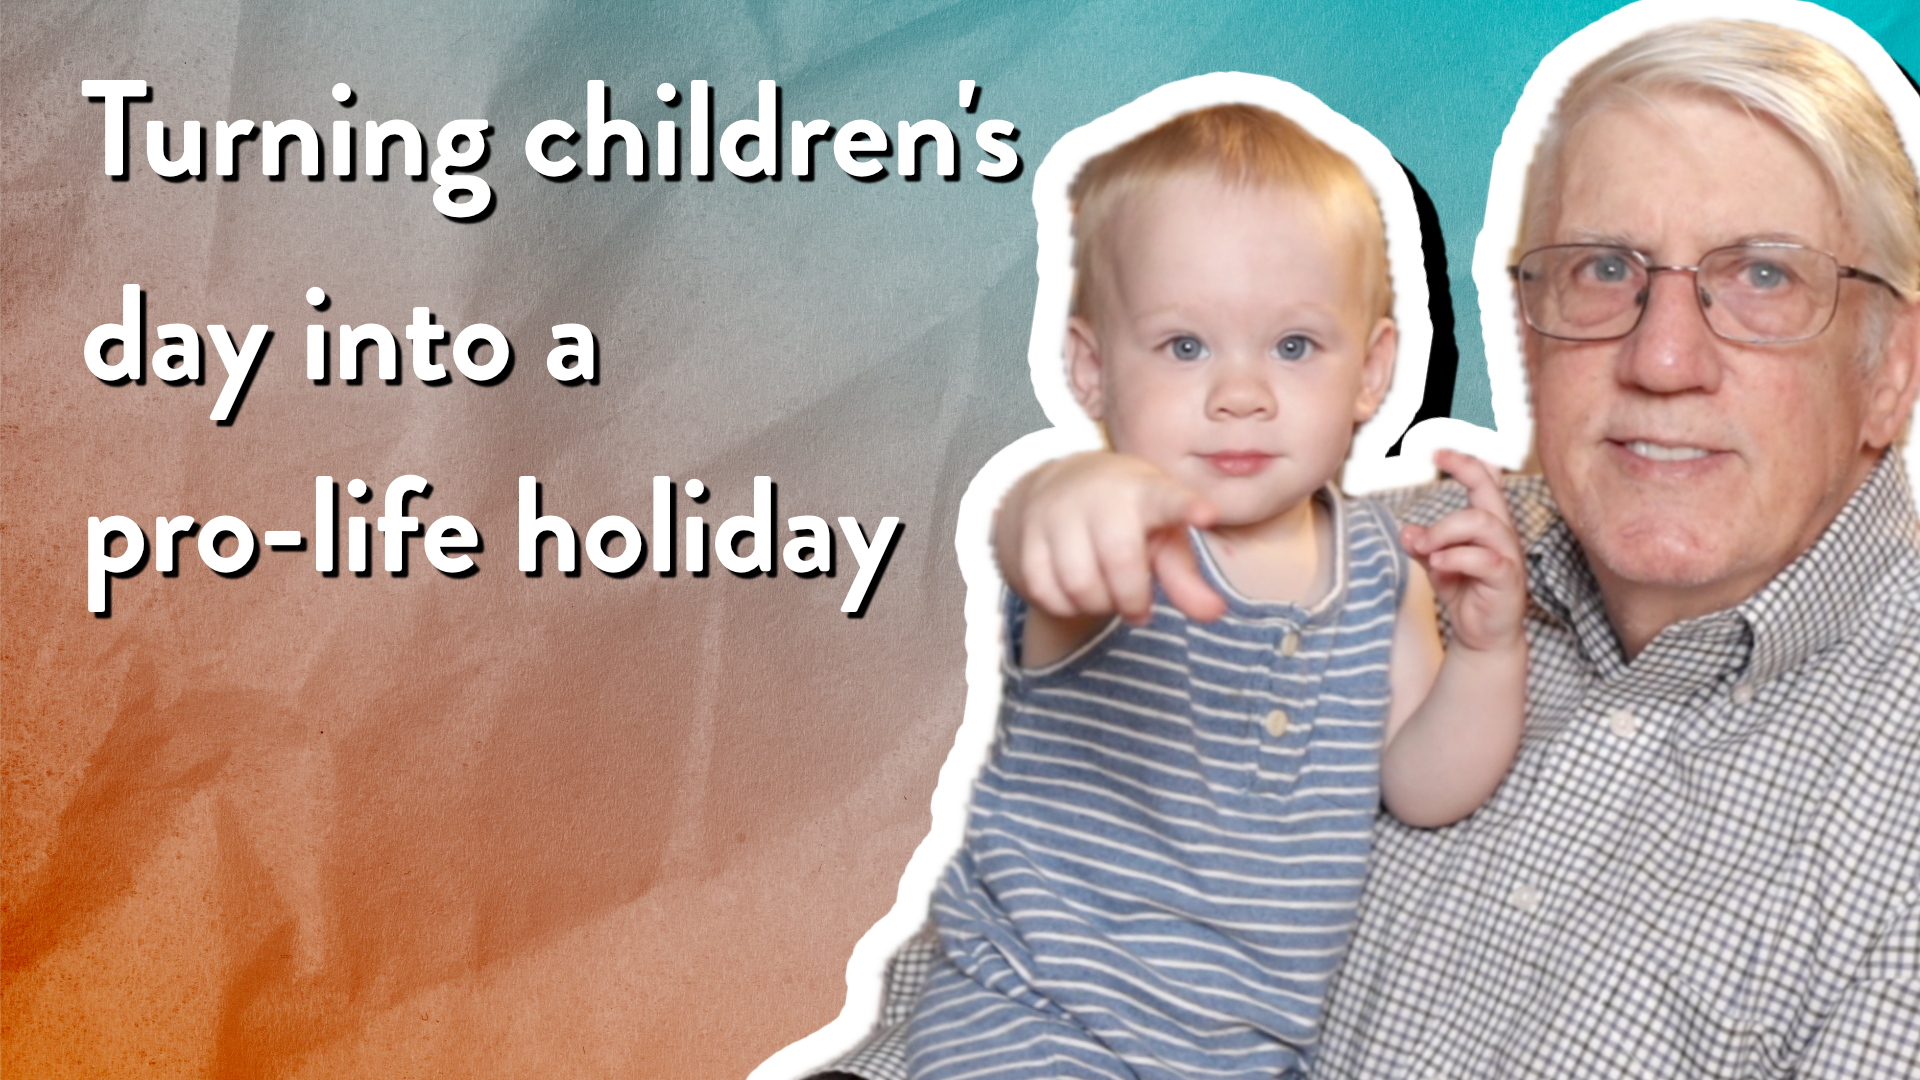 Turning children’s day into a pro-life holiday